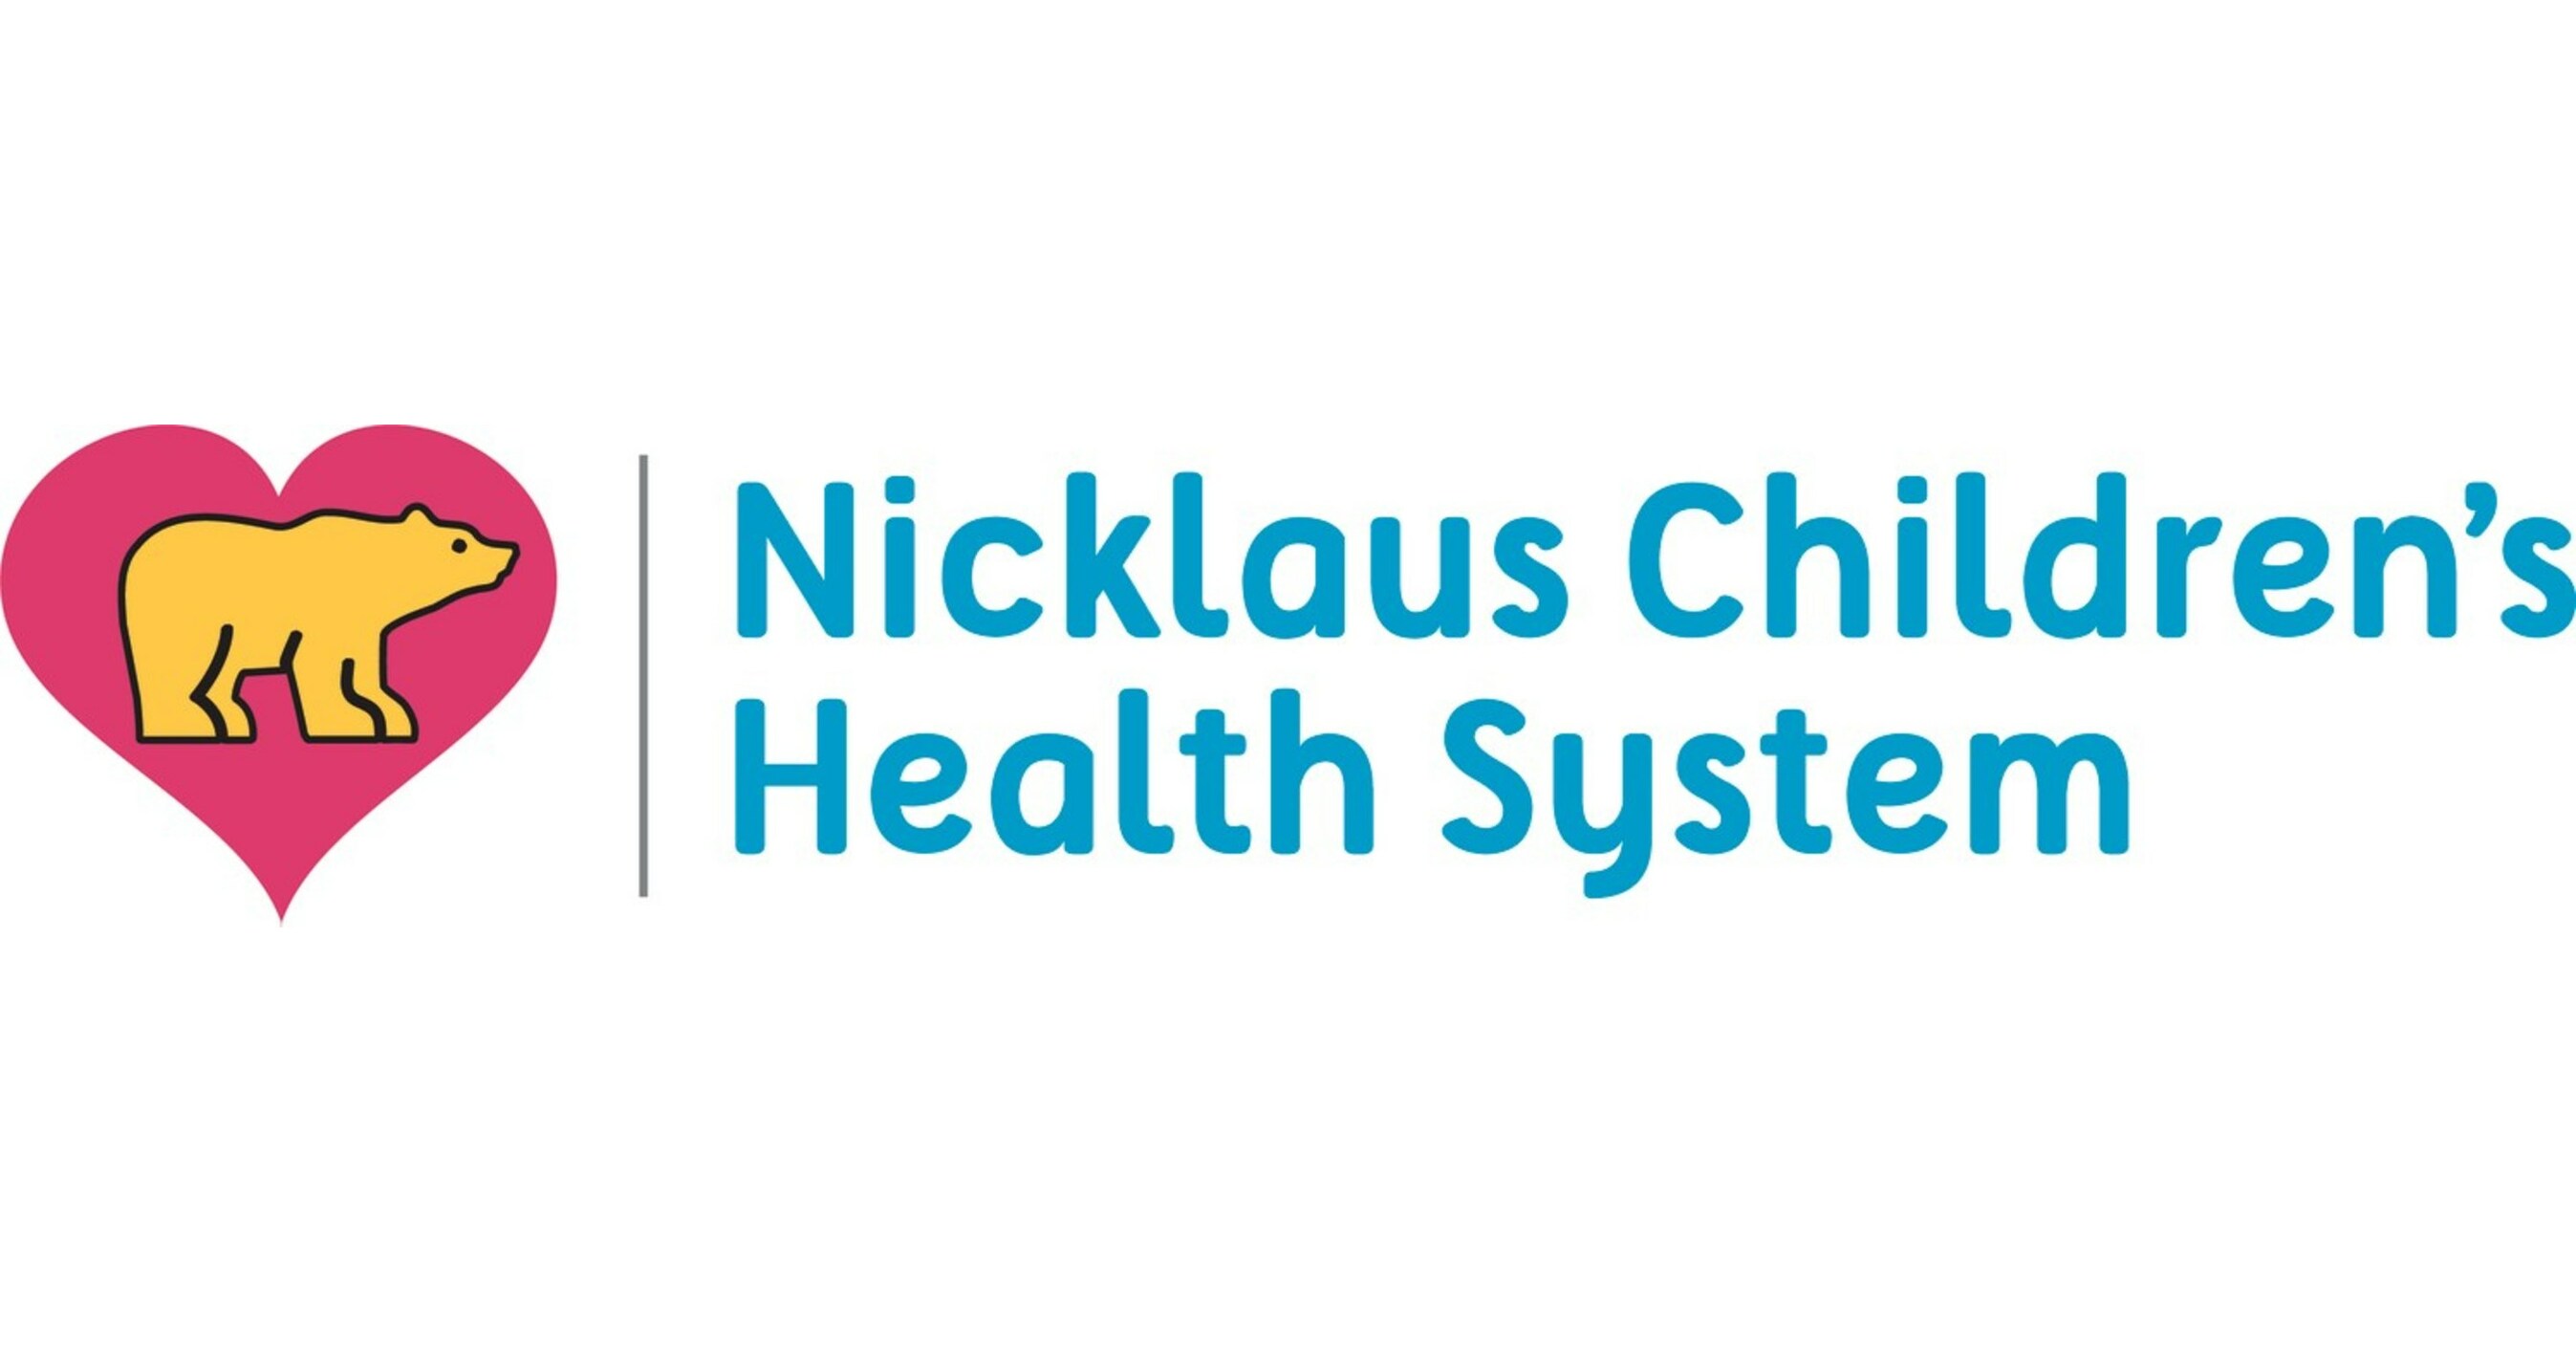 Nicklaus Children’s Health System: Recognized as a Leader in Pediatric Care with Upgraded Ratings